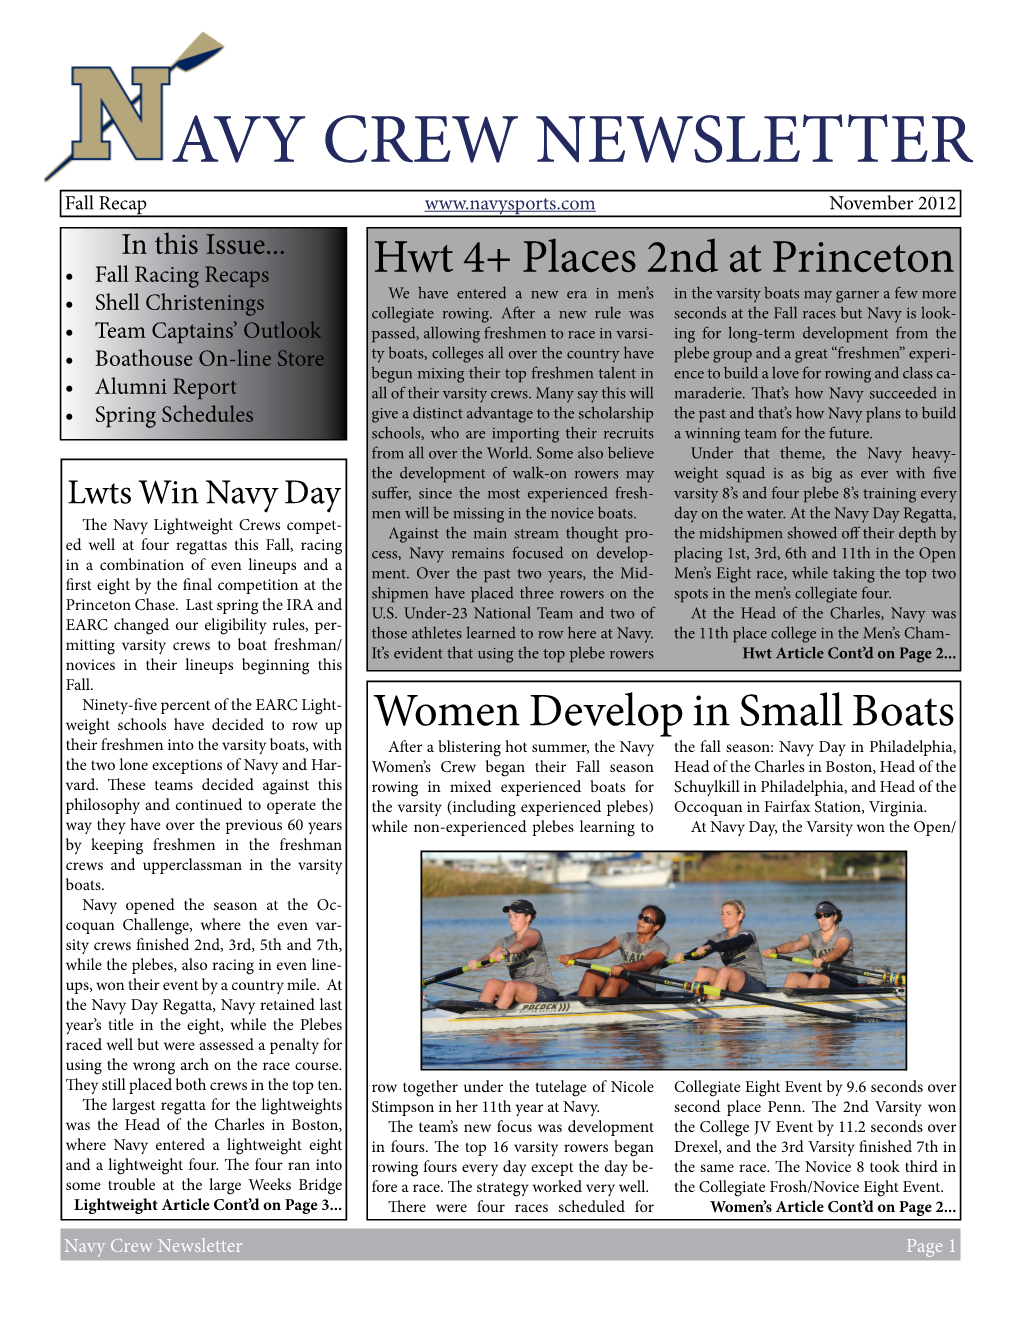 Navy Crew Newsletter Page 1 Hwt Article Cont’D